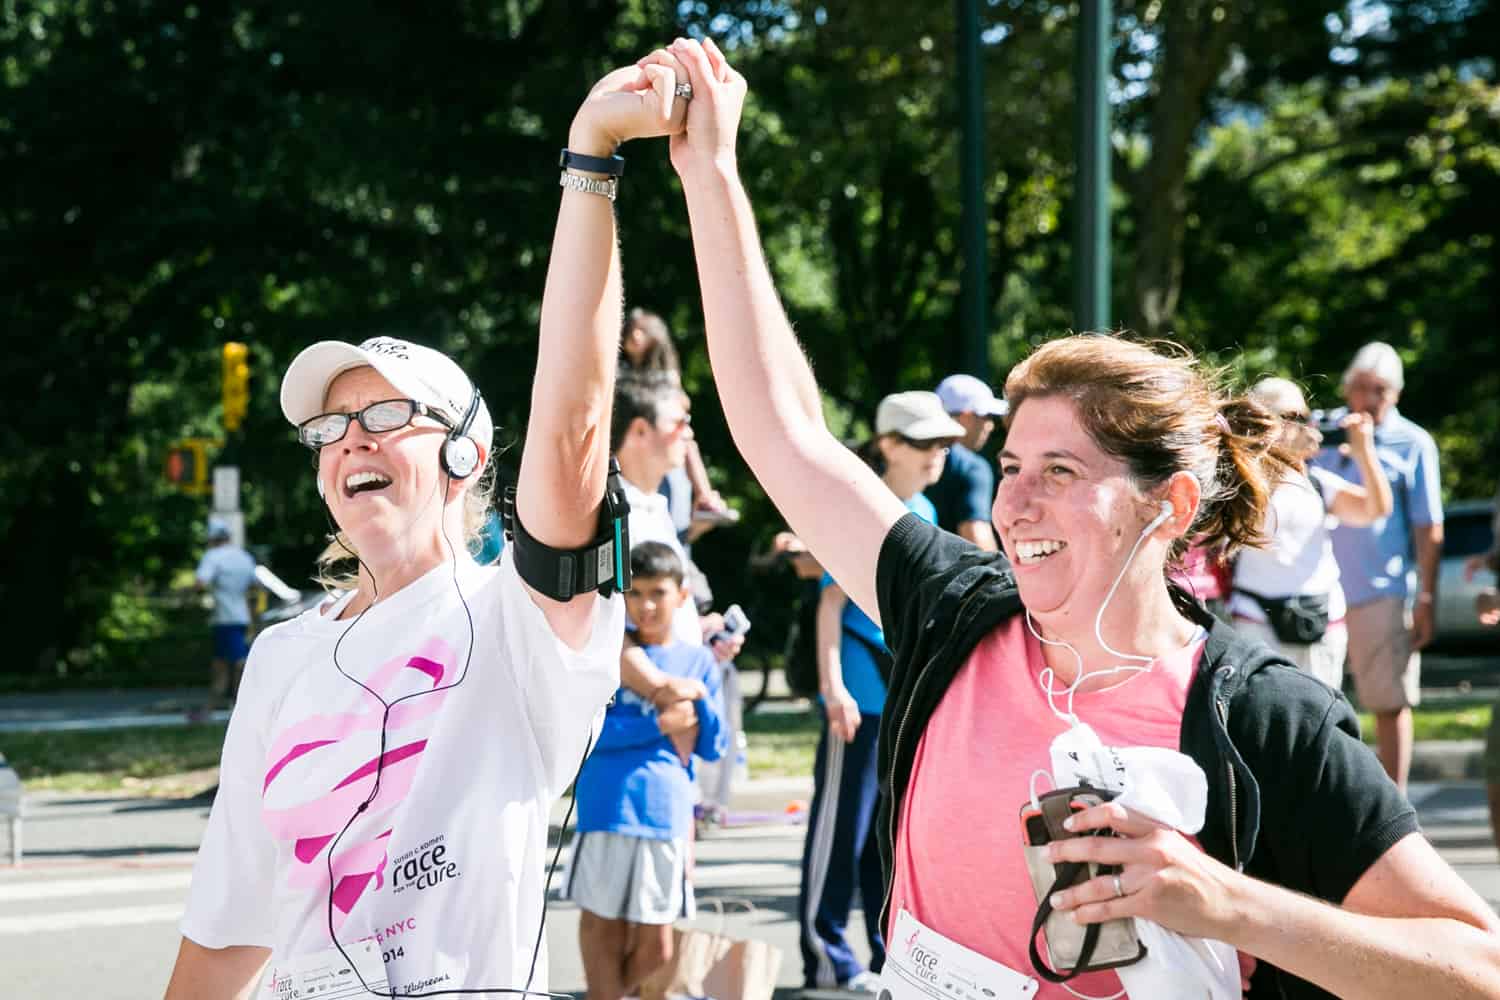 NYC Race for the Cure photos of two women crossing finish line with hands held in air